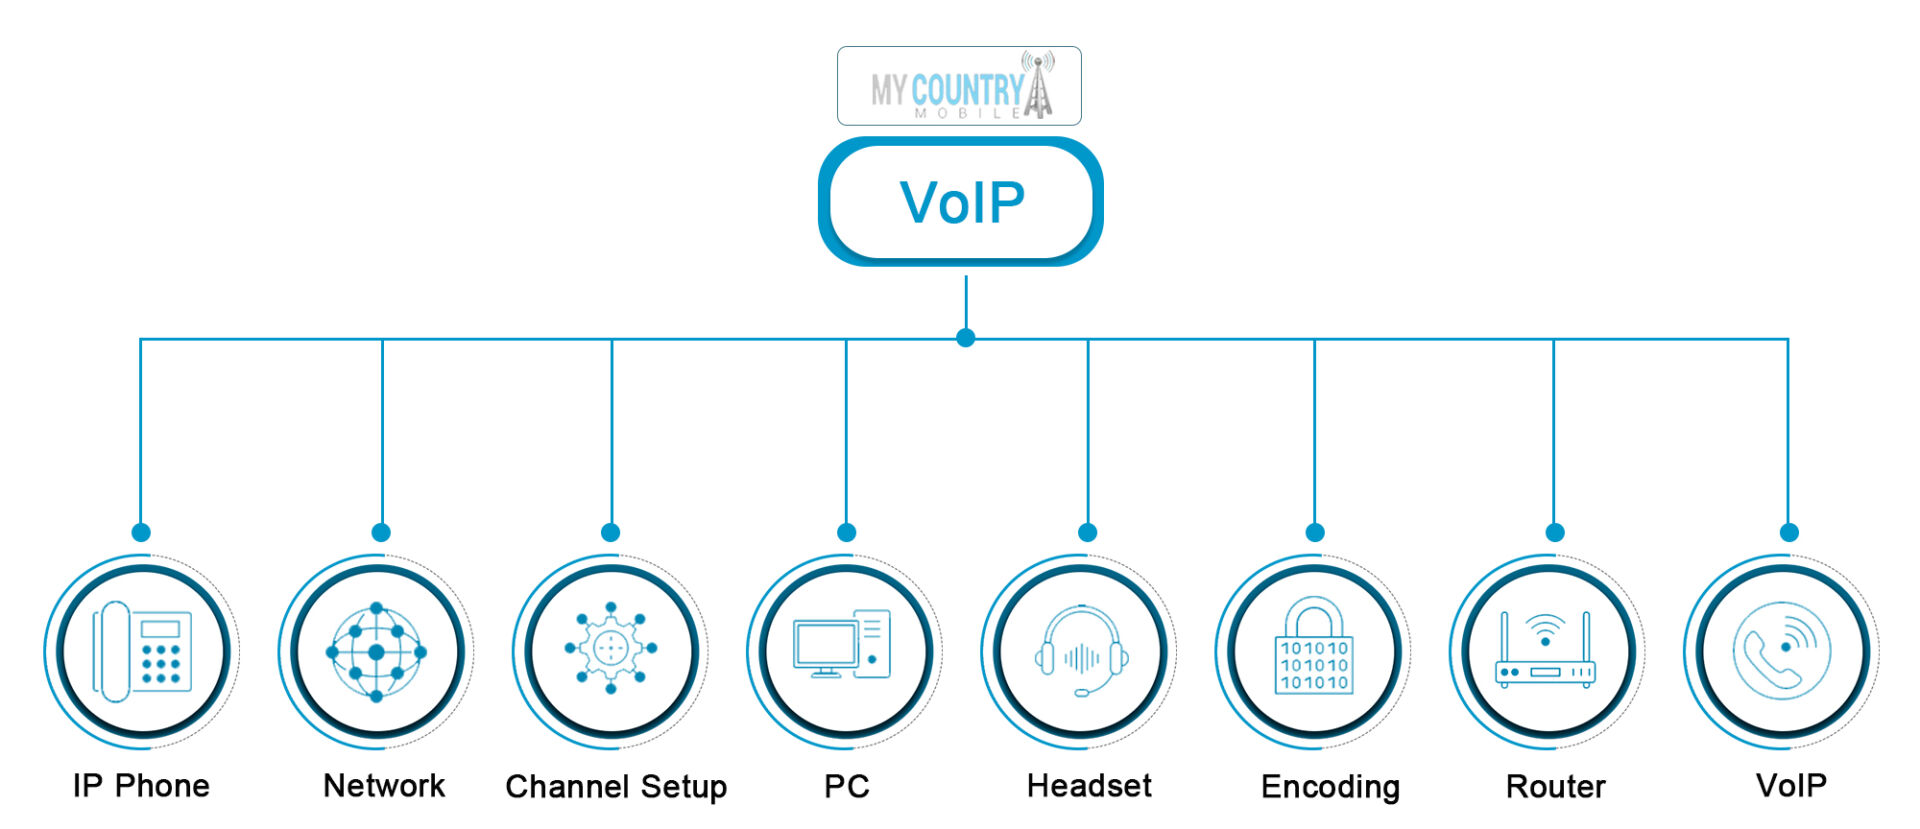 Organization VoIP Attributes - My Country Mobile